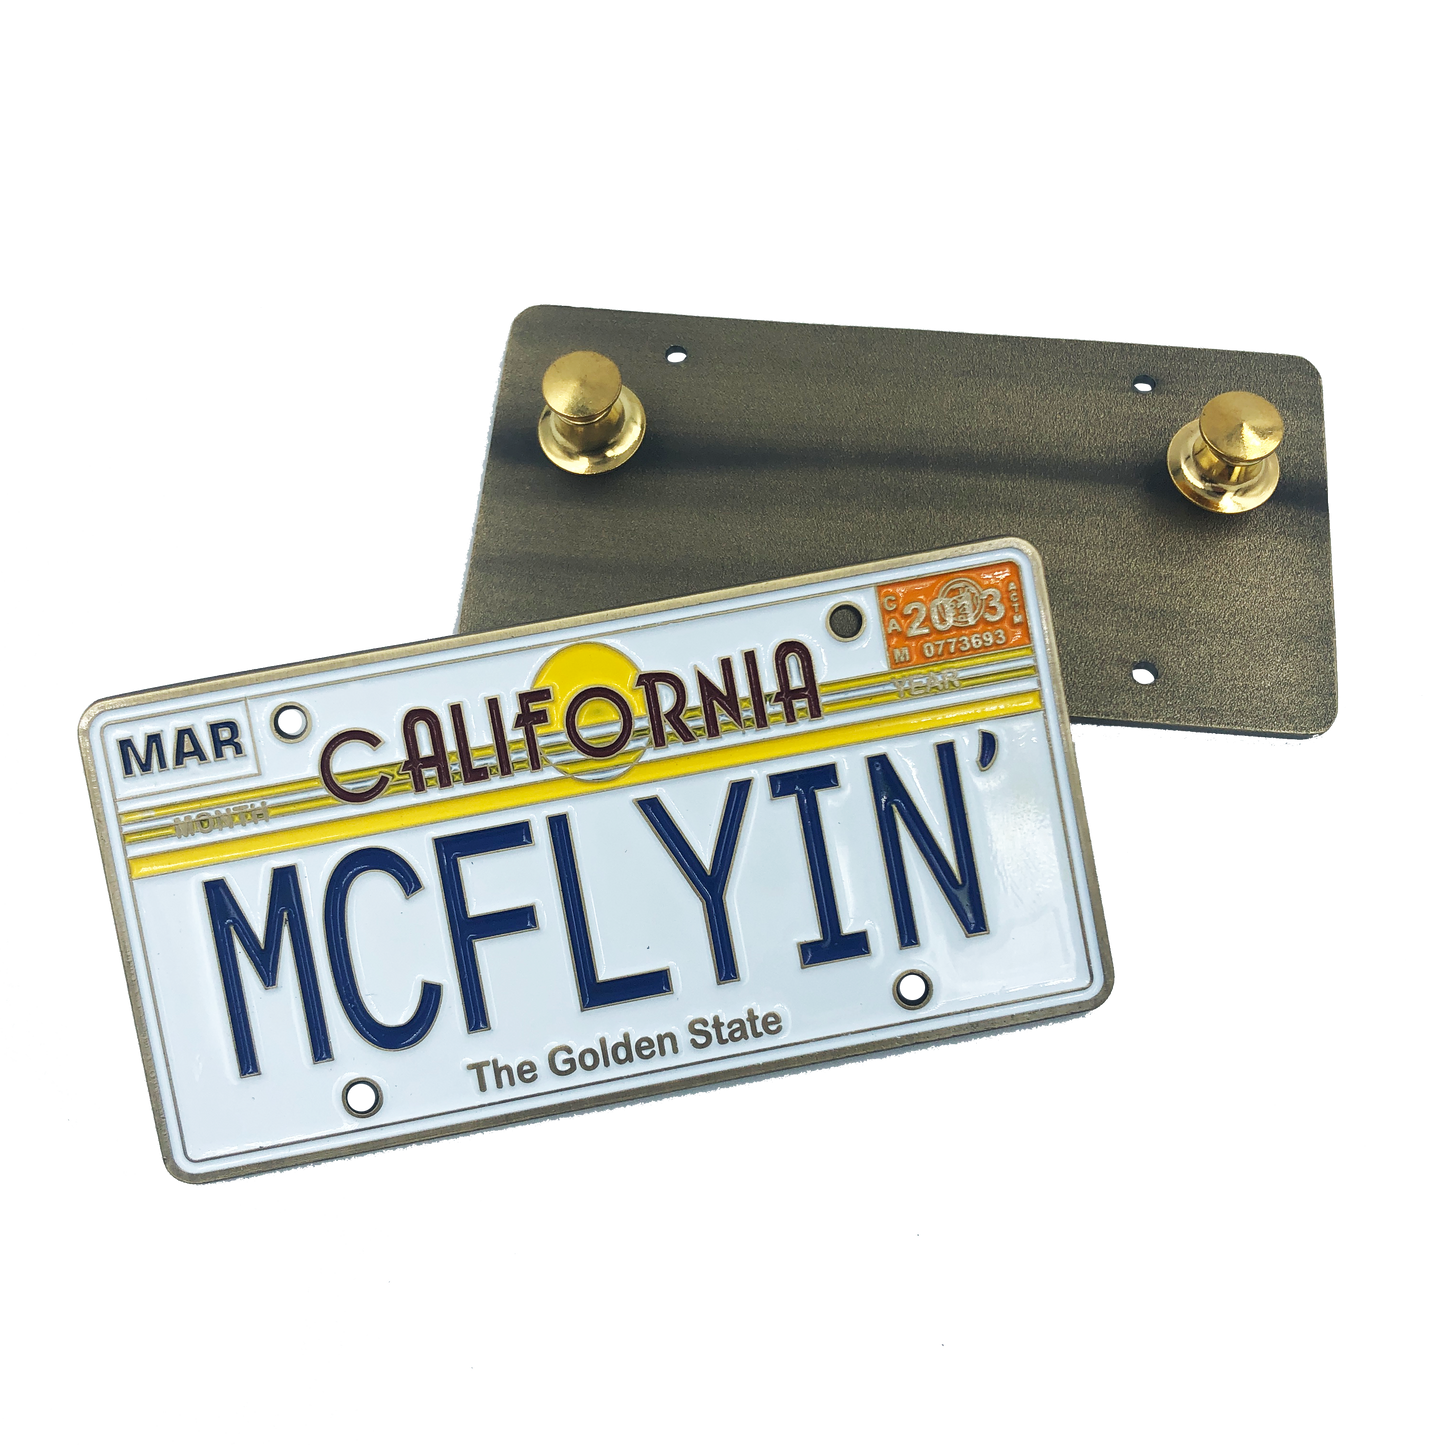 FF-018 MCFLYIN Back to the Future License Plate Medallion Pin with dual pin backs Marty MyFly OUTATIME alternative